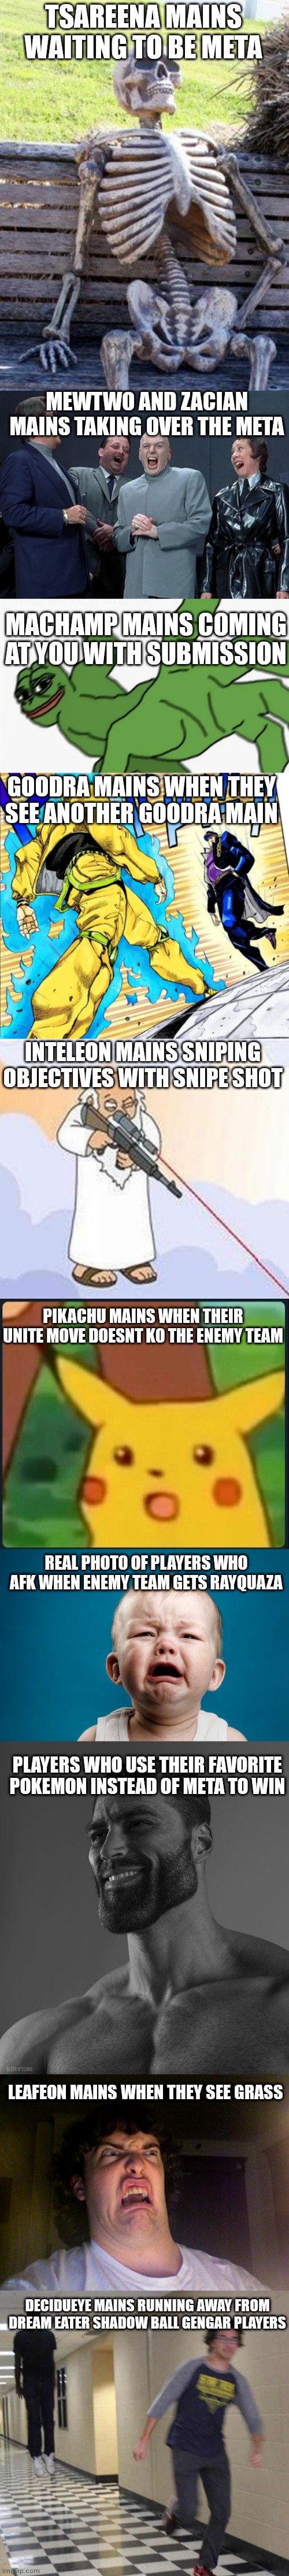 Pokemon unite slander part 1 | TSAREENA MAINS WAITING TO BE META; MEWTWO AND ZACIAN MAINS TAKING OVER THE META; MACHAMP MAINS COMING AT YOU WITH SUBMISSION; GOODRA MAINS WHEN THEY SEE ANOTHER GOODRA MAIN; INTELEON MAINS SNIPING OBJECTIVES WITH SNIPE SHOT; PIKACHU MAINS WHEN THEIR UNITE MOVE DOESNT KO THE ENEMY TEAM; REAL PHOTO OF PLAYERS WHO AFK WHEN ENEMY TEAM GETS RAYQUAZA; PLAYERS WHO USE THEIR FAVORITE POKEMON INSTEAD OF META TO WIN; LEAFEON MAINS WHEN THEY SEE GRASS; DECIDUEYE MAINS RUNNING AWAY FROM DREAM EATER SHADOW BALL GENGAR PLAYERS | image tagged in memes,pokemon,slander | made w/ Imgflip meme maker